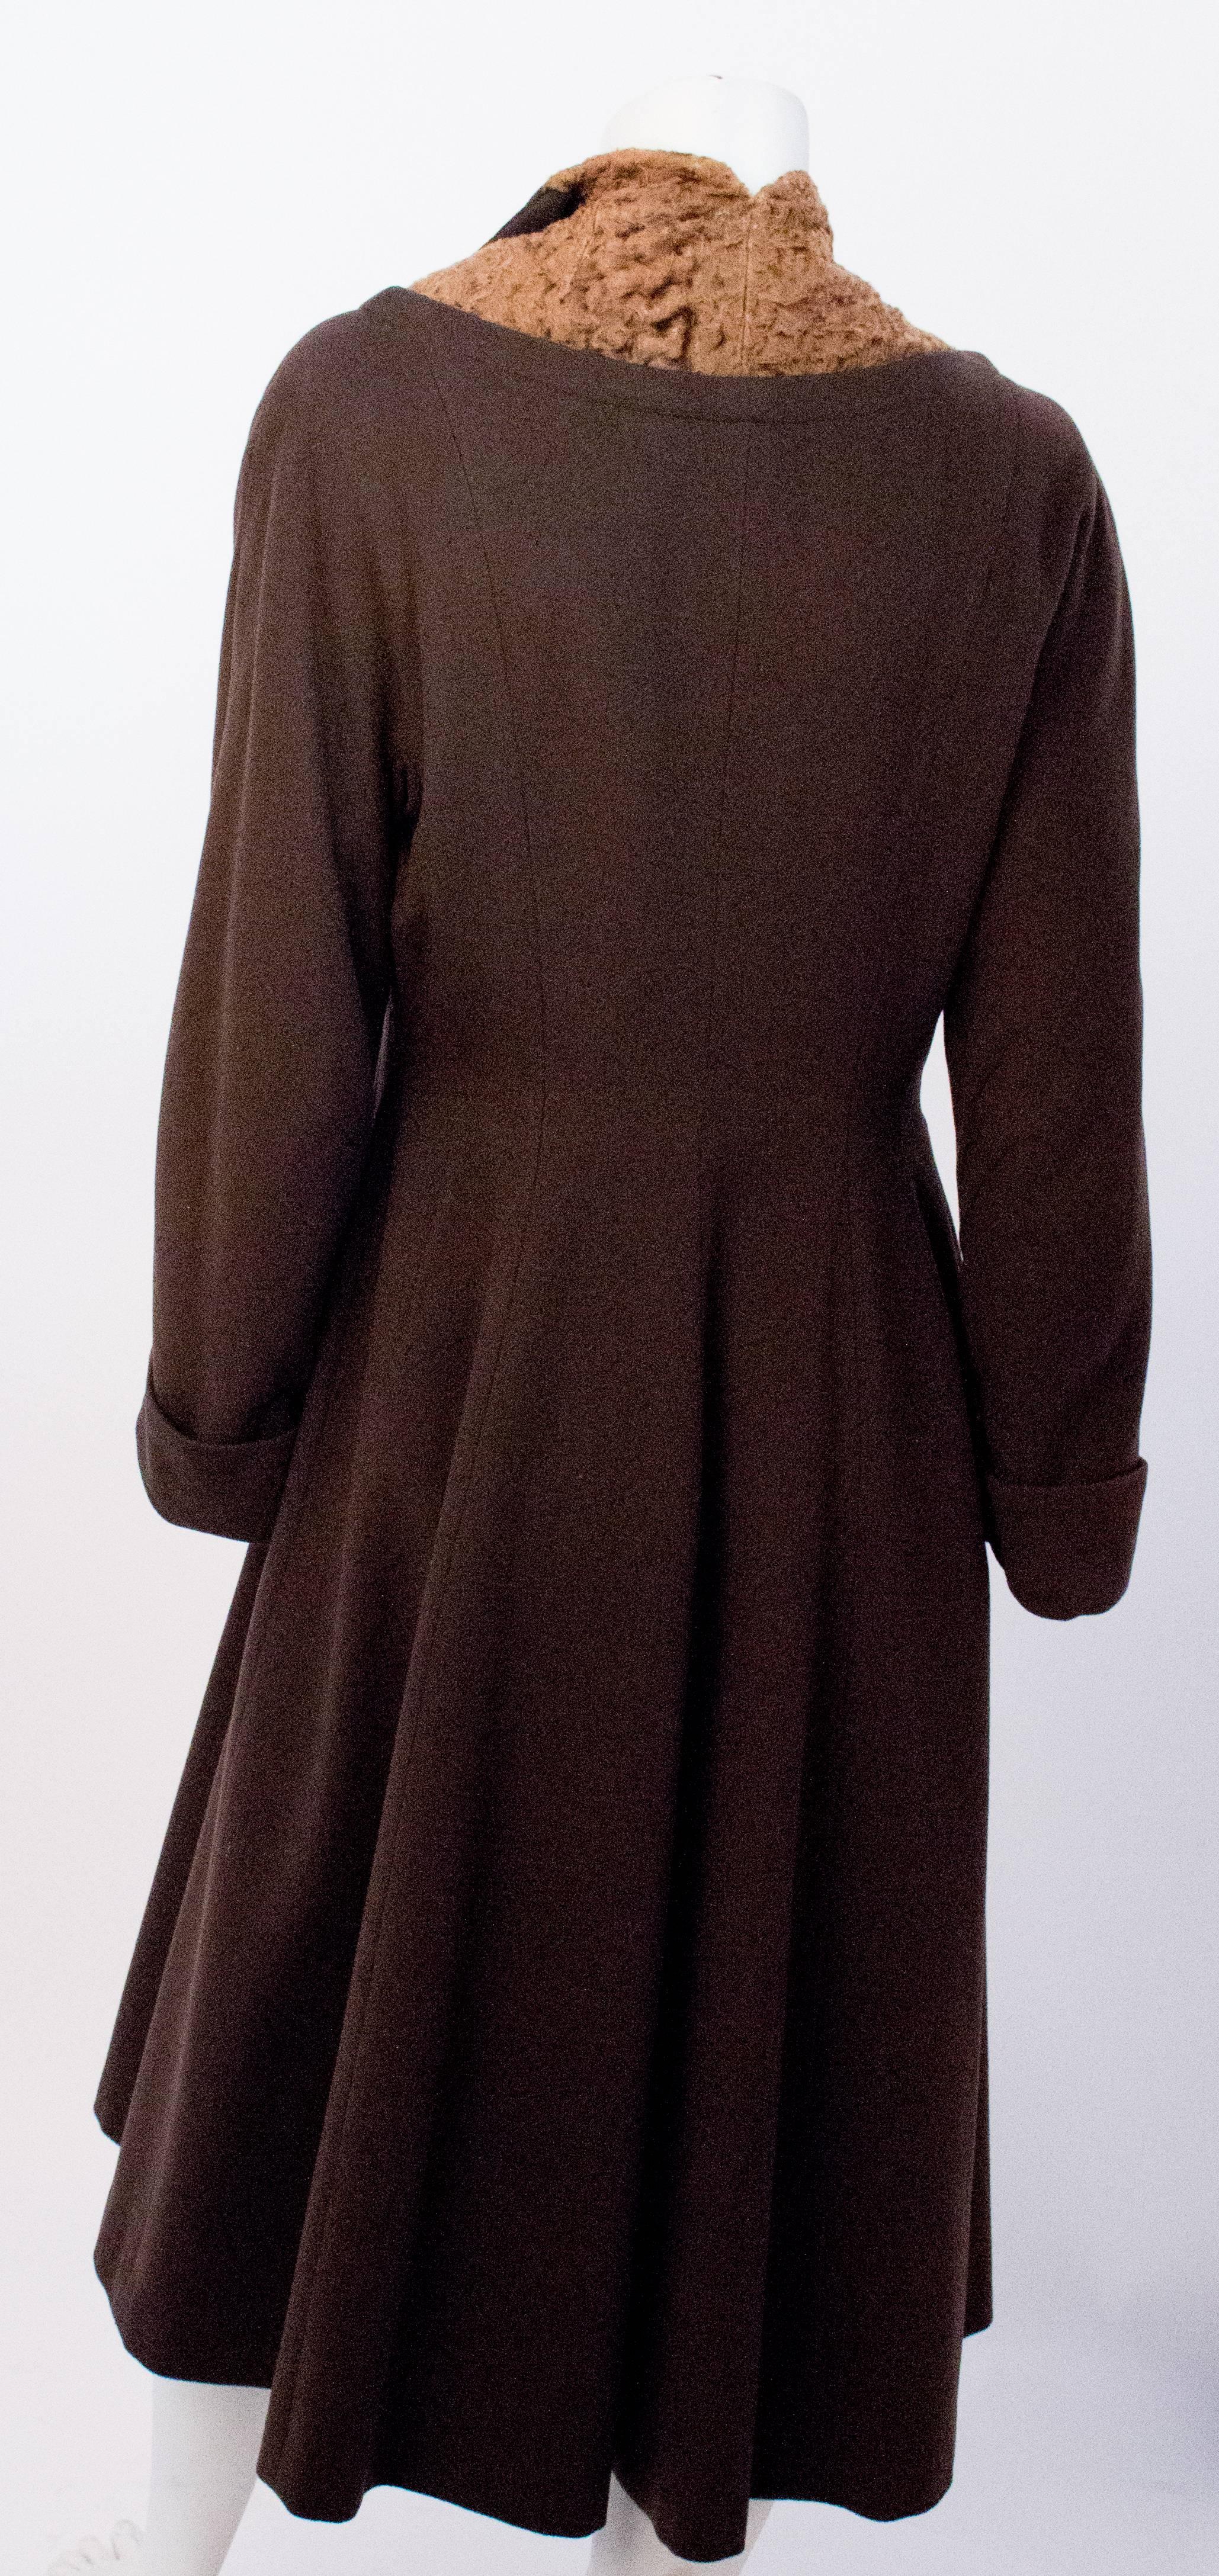 30s Brown Wool Princess Coat with Lamb Embellishment. Pockets. Fully lined in satin. 

